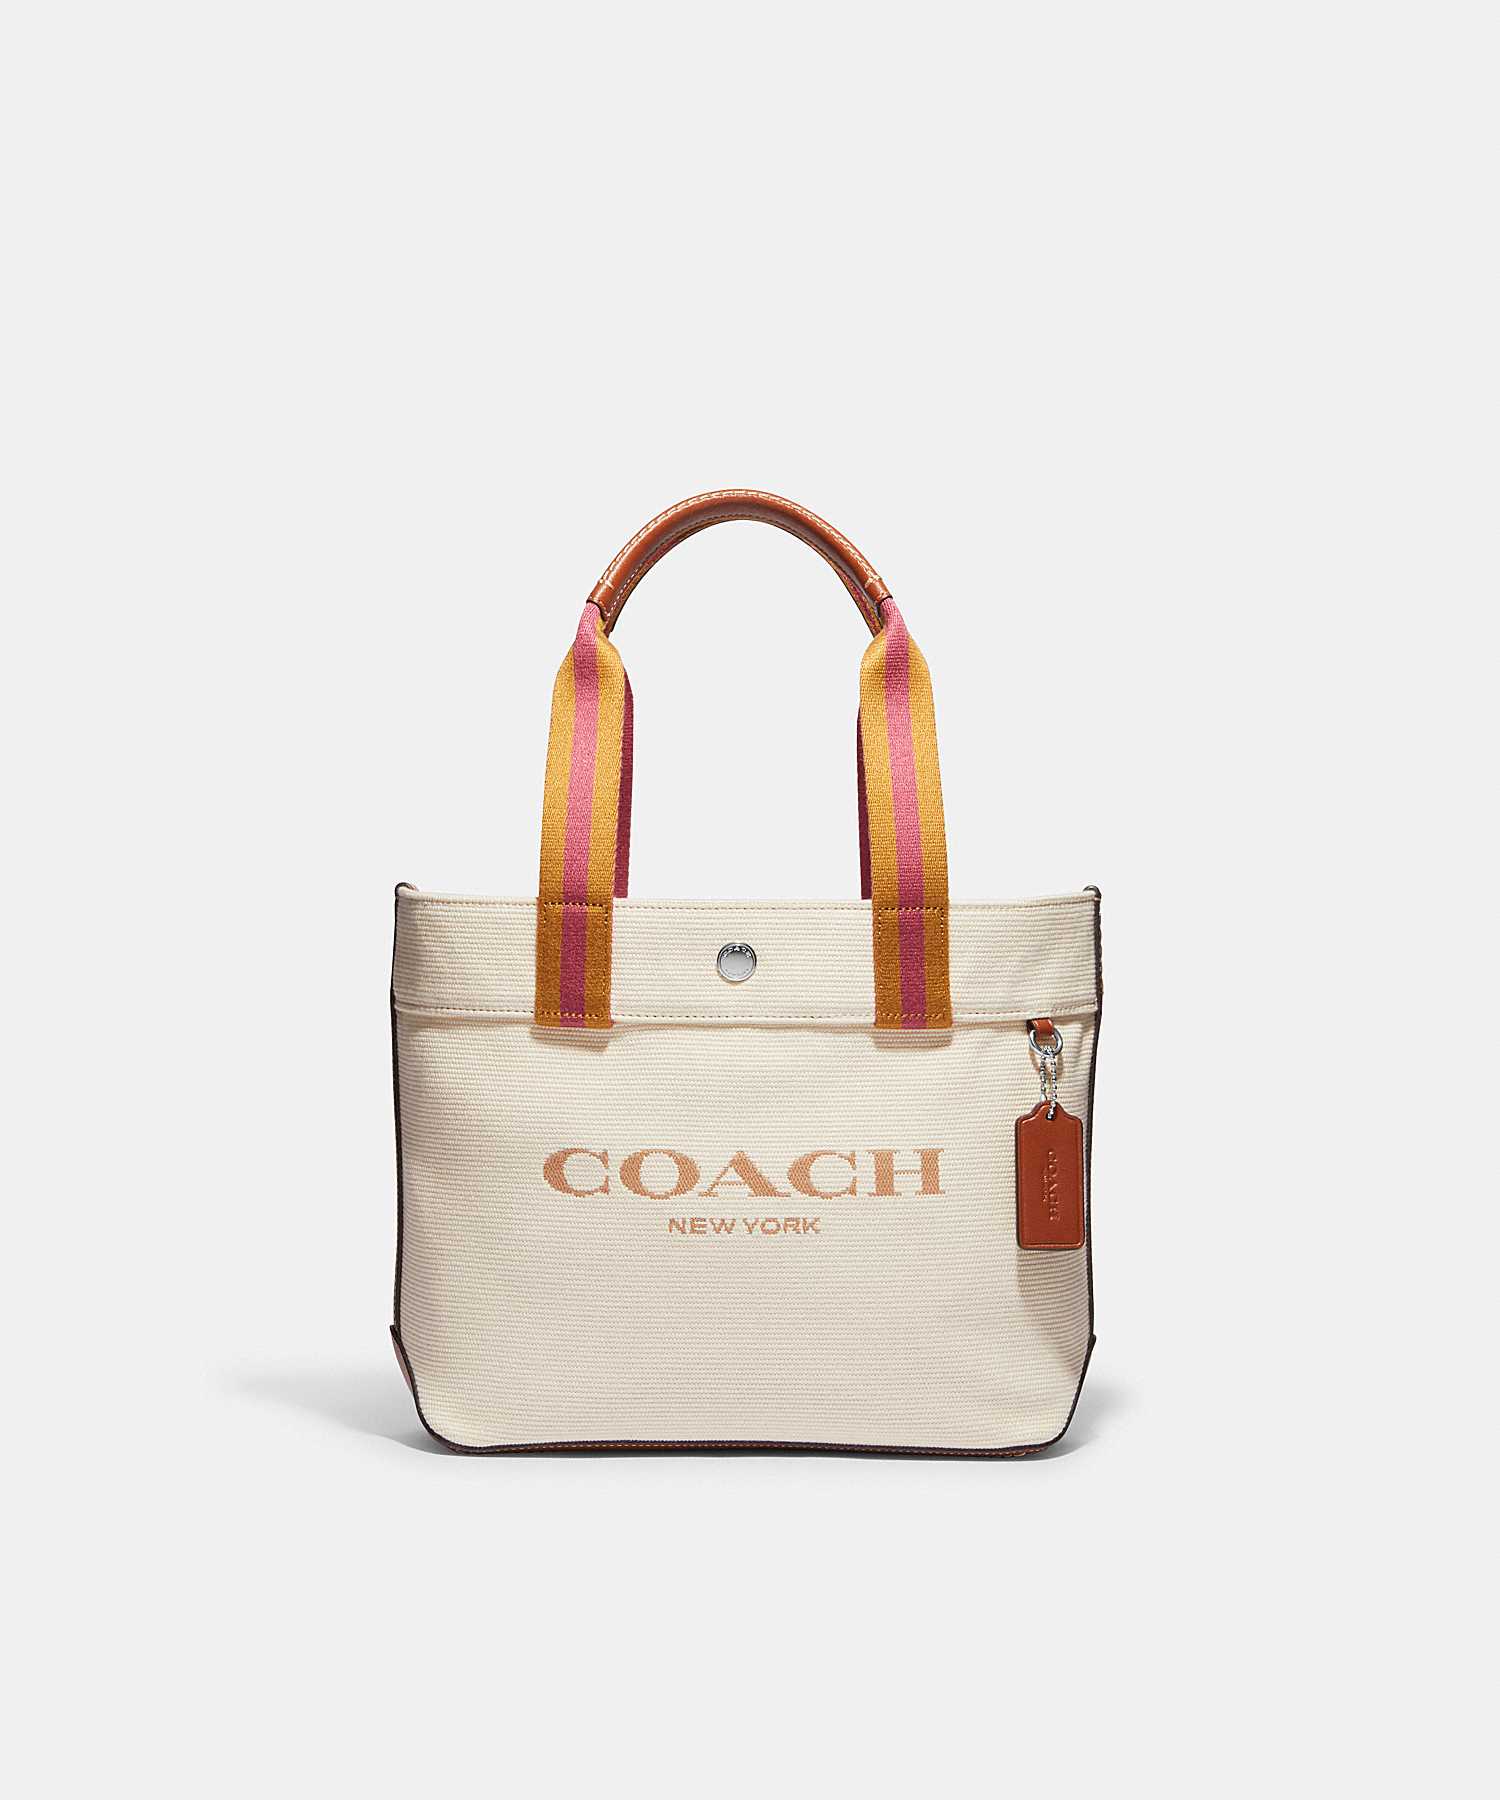 COACH SMALL TOTE CK168 SV/NP | LINE SHOPPING